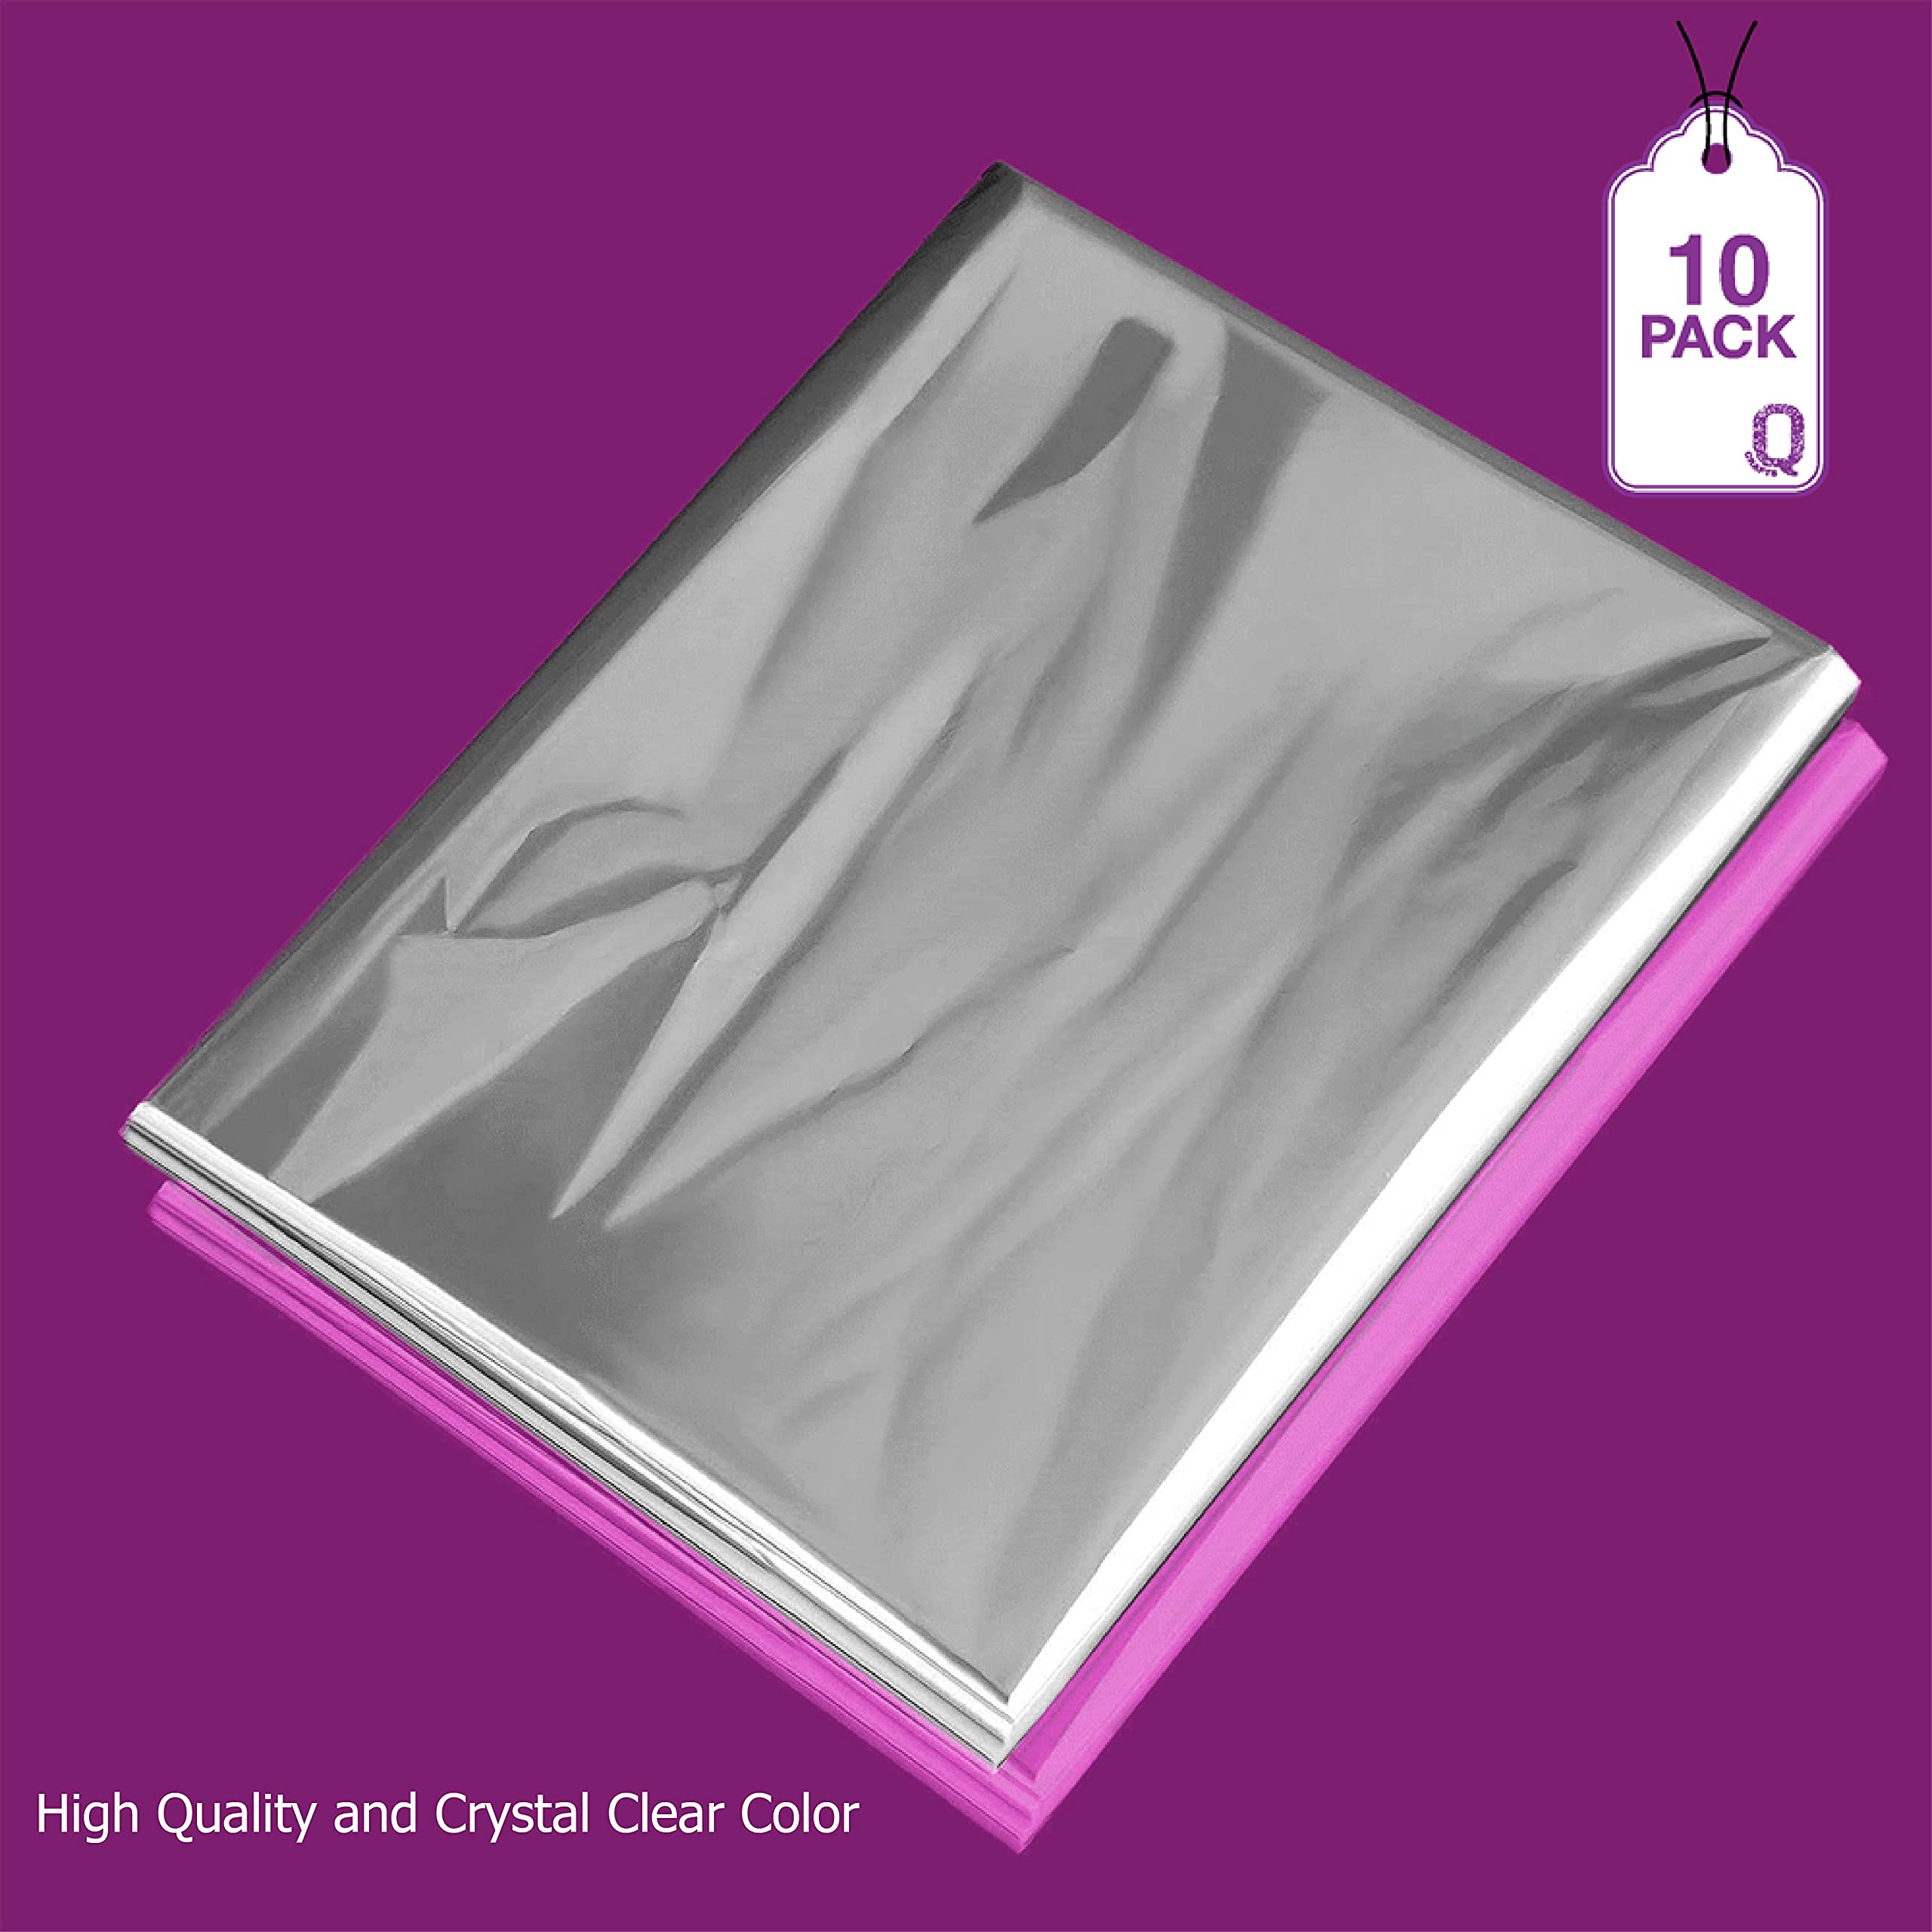 Purple Q Crafts Clear Basket Bags, 10 Pack Large Clear Cellophane Wrap for Baskets & Gifts 24